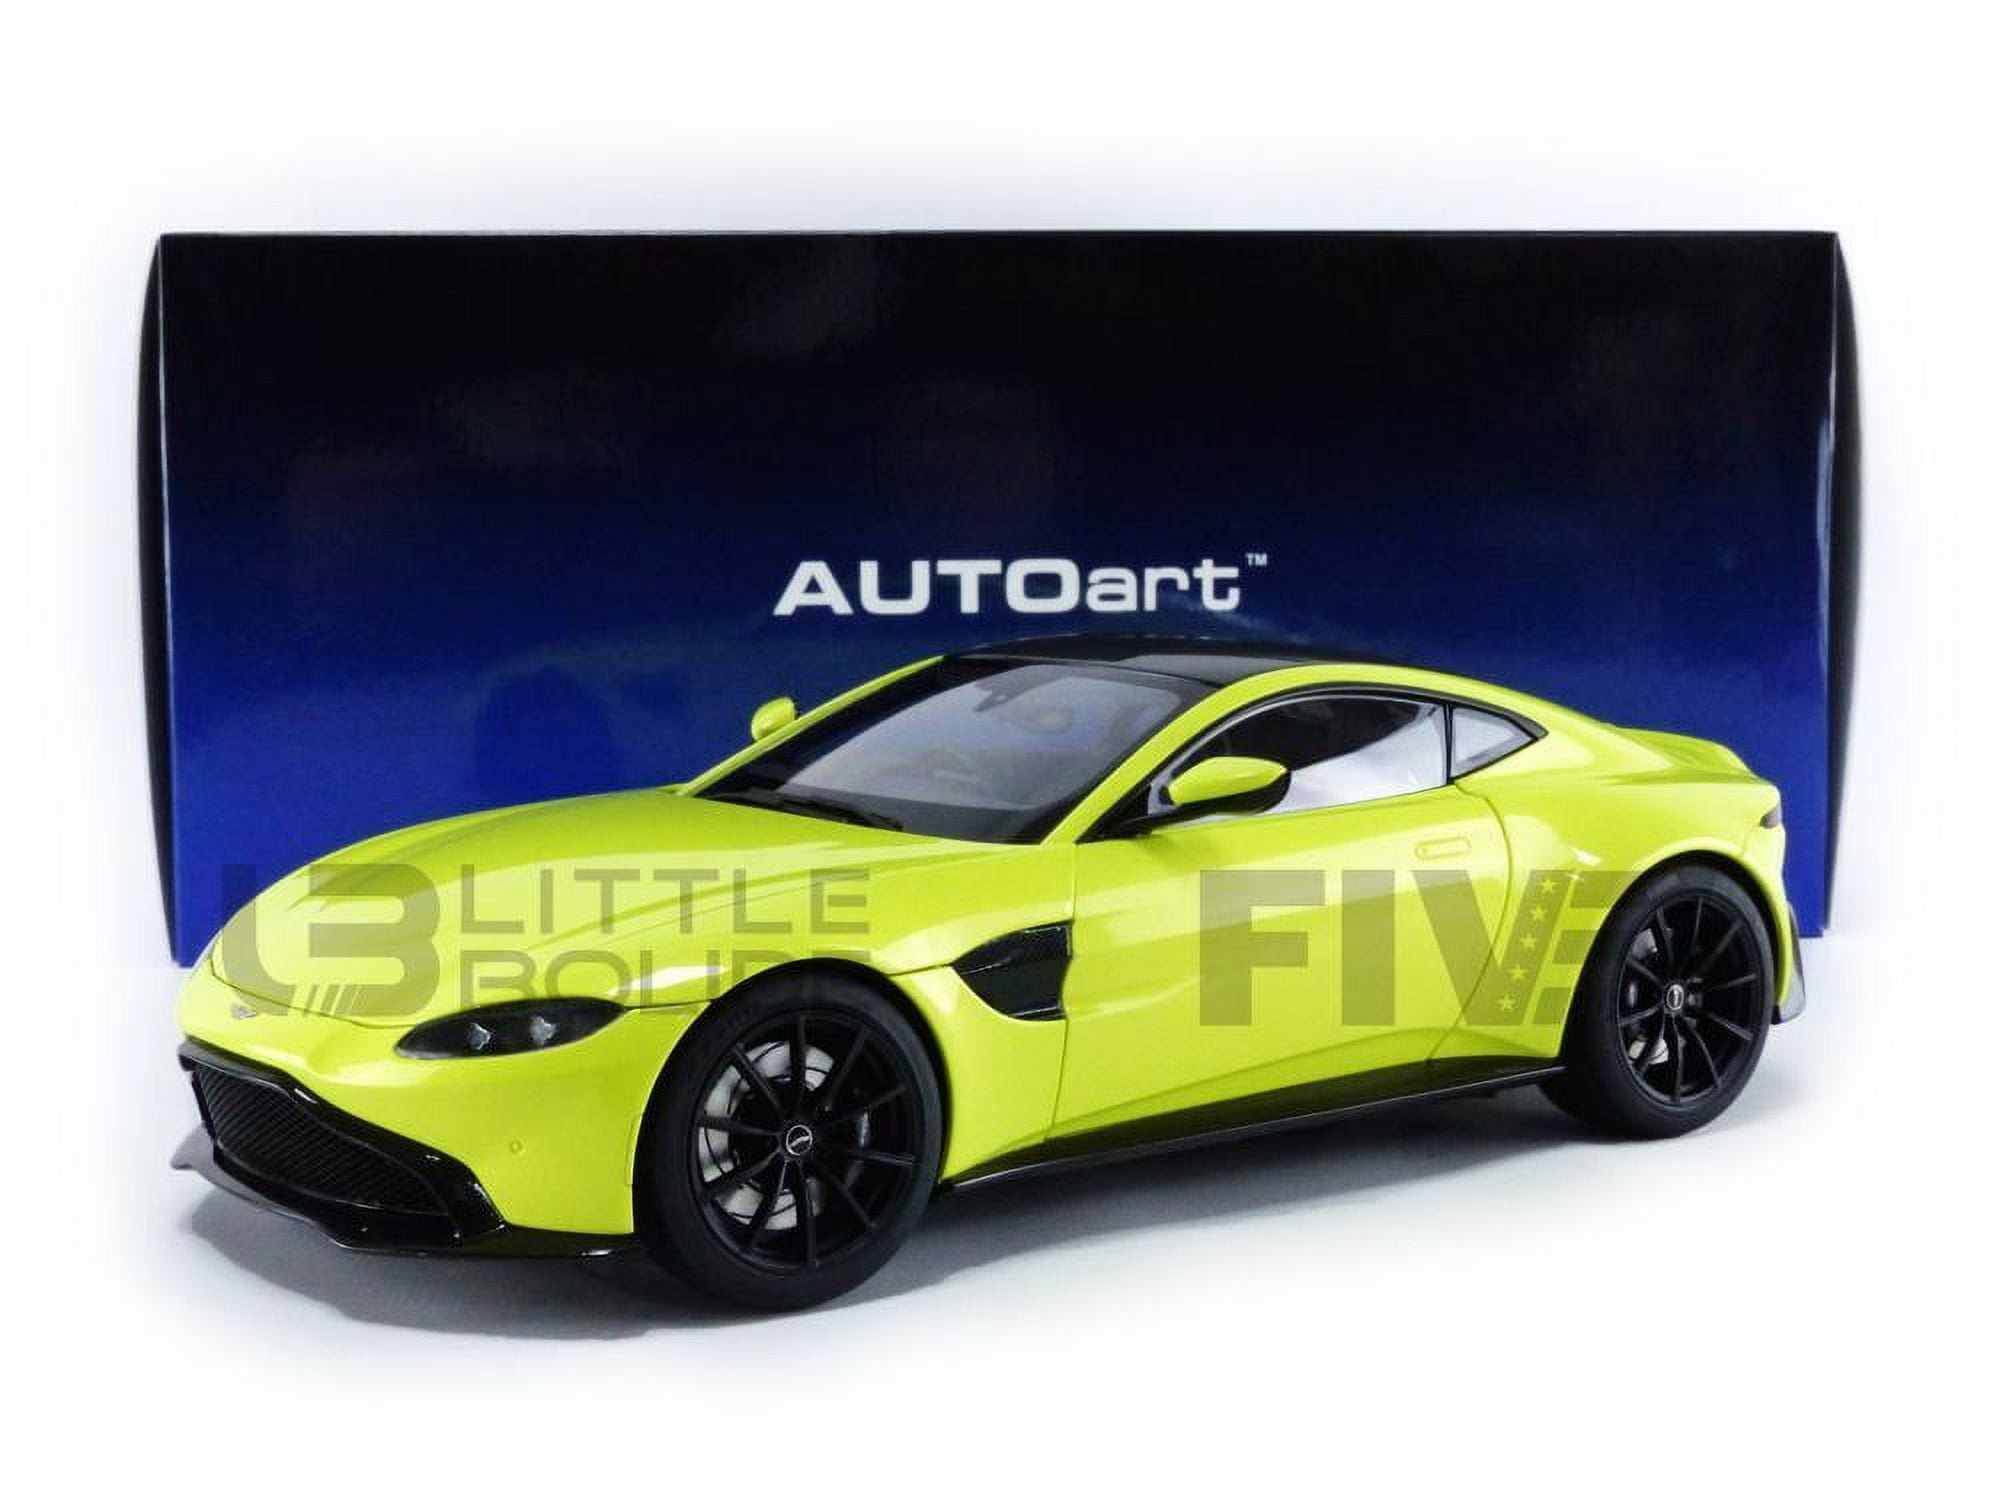 Picture of Autoart 70279 Lime Essence Green with Carbon Top 1 by 18 Scale Model Car for 2019 Aston Martin Vantage RHD